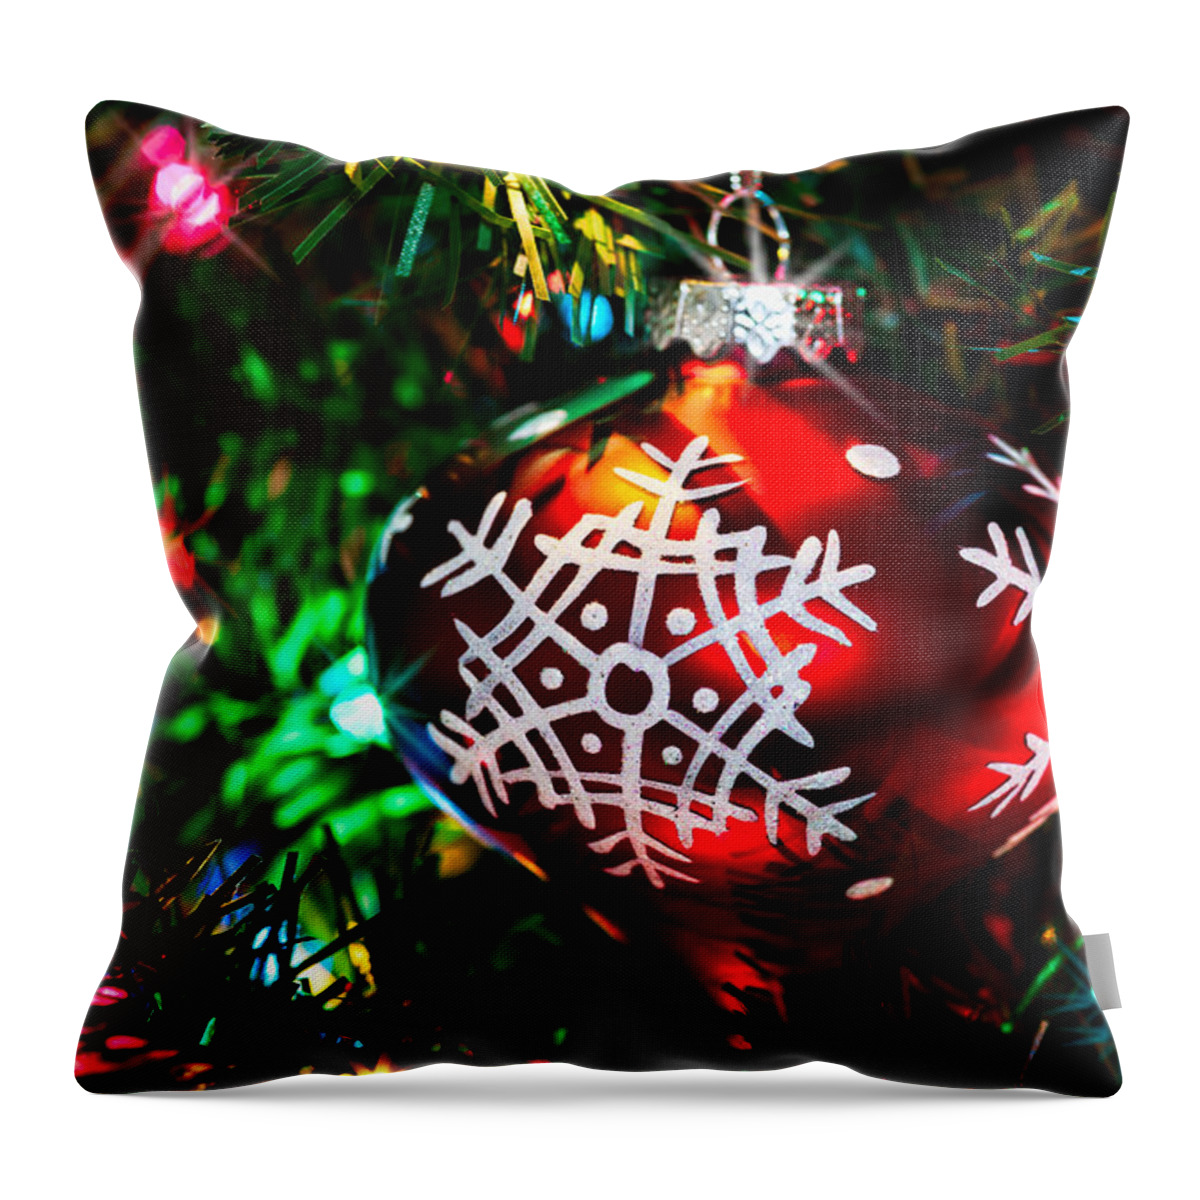 Snowflake Throw Pillow featuring the photograph Snowflake Ornament by Christopher Holmes